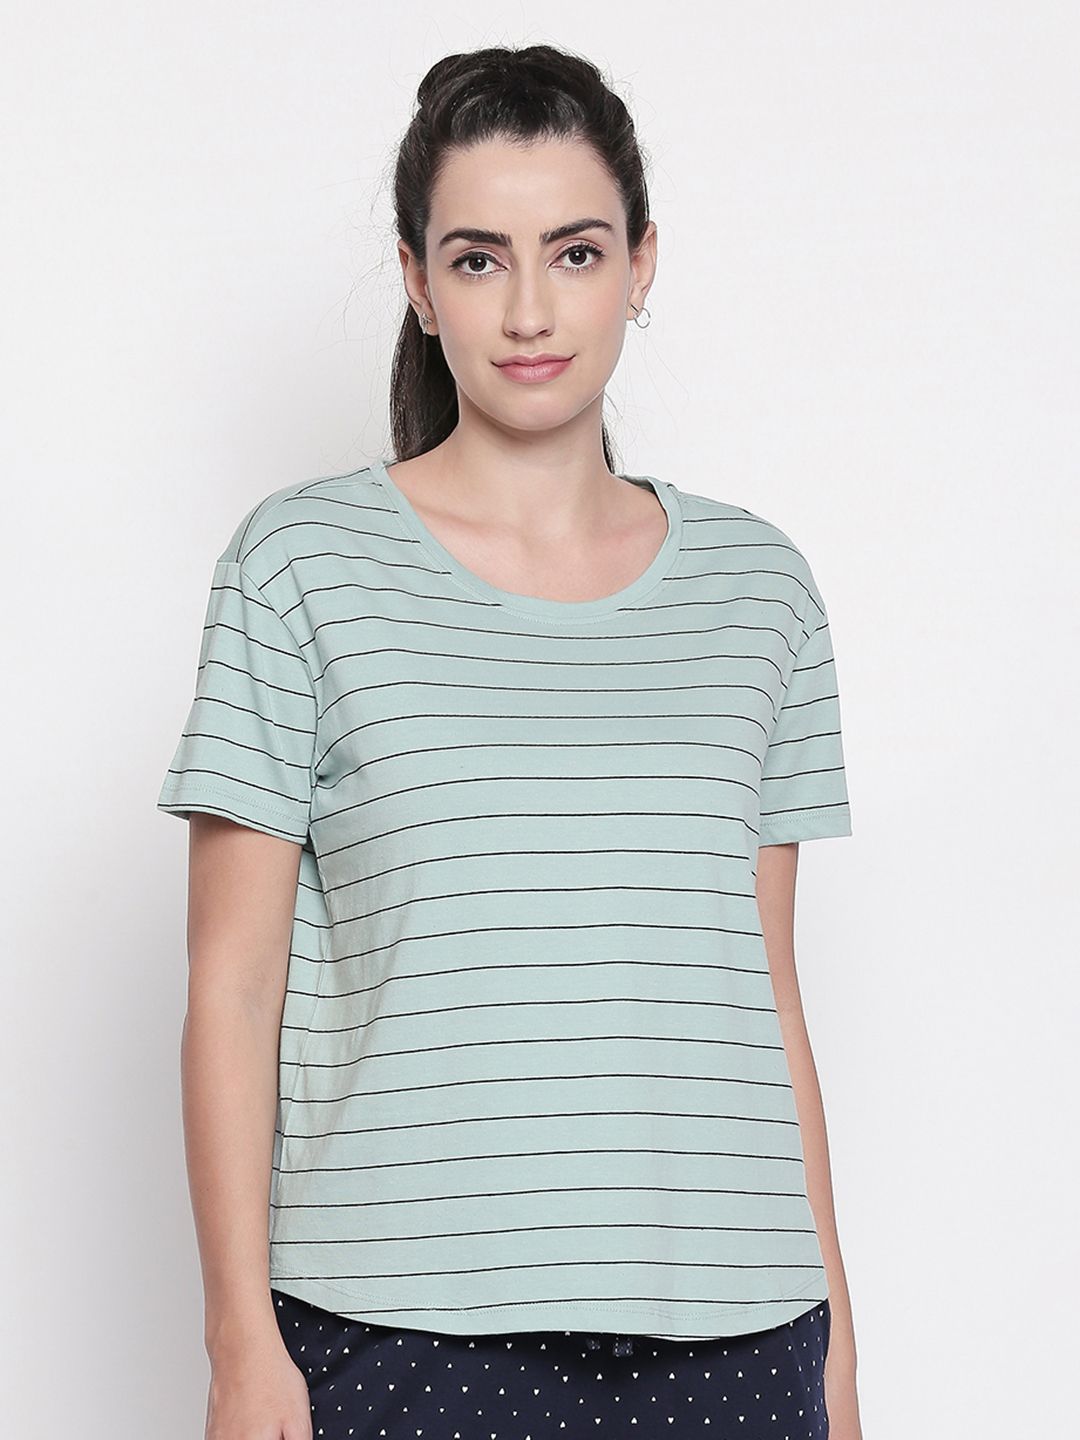 Dreamz by Pantaloons Women Green Striped Lounge tshirt Price in India